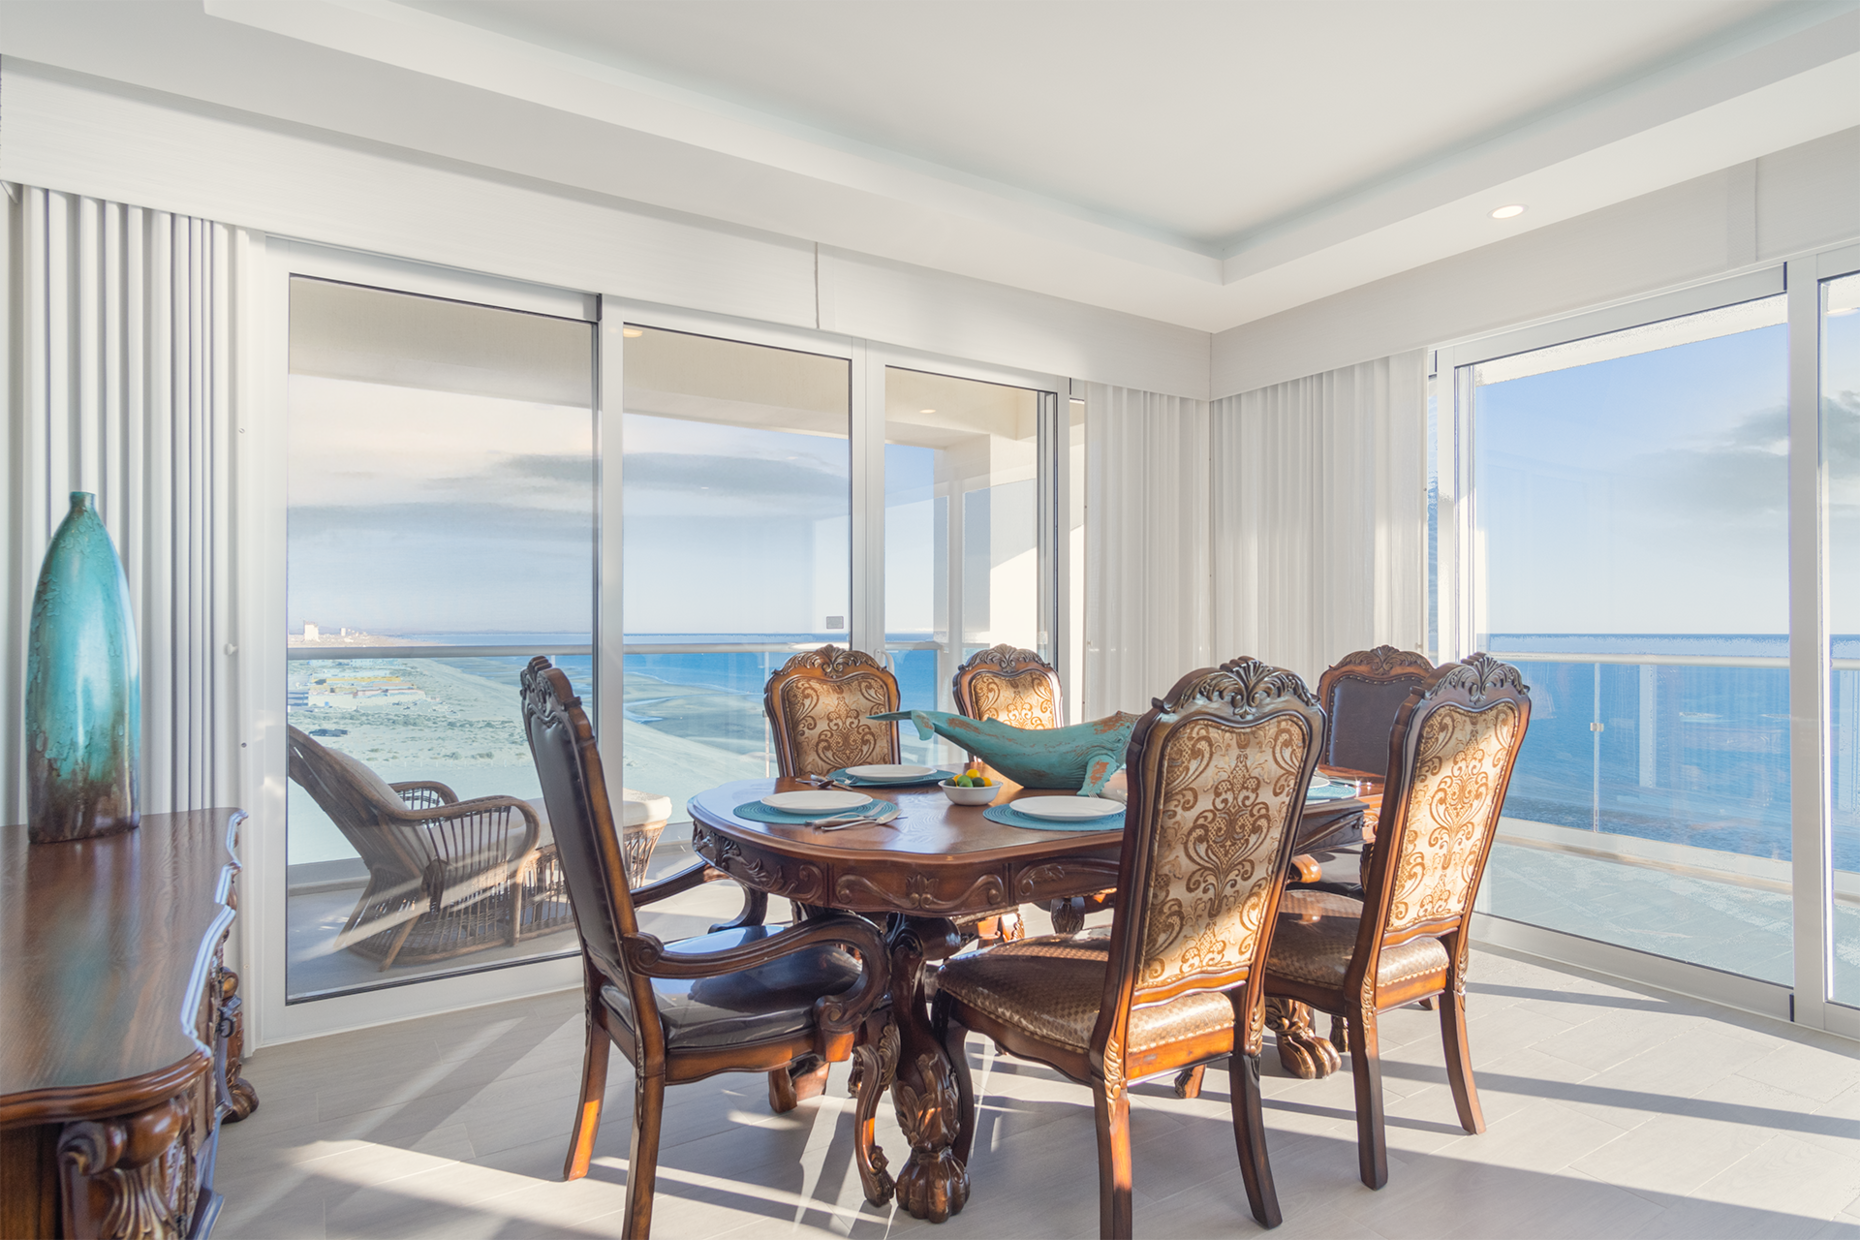 The dining table is surrounded by views of the beach.